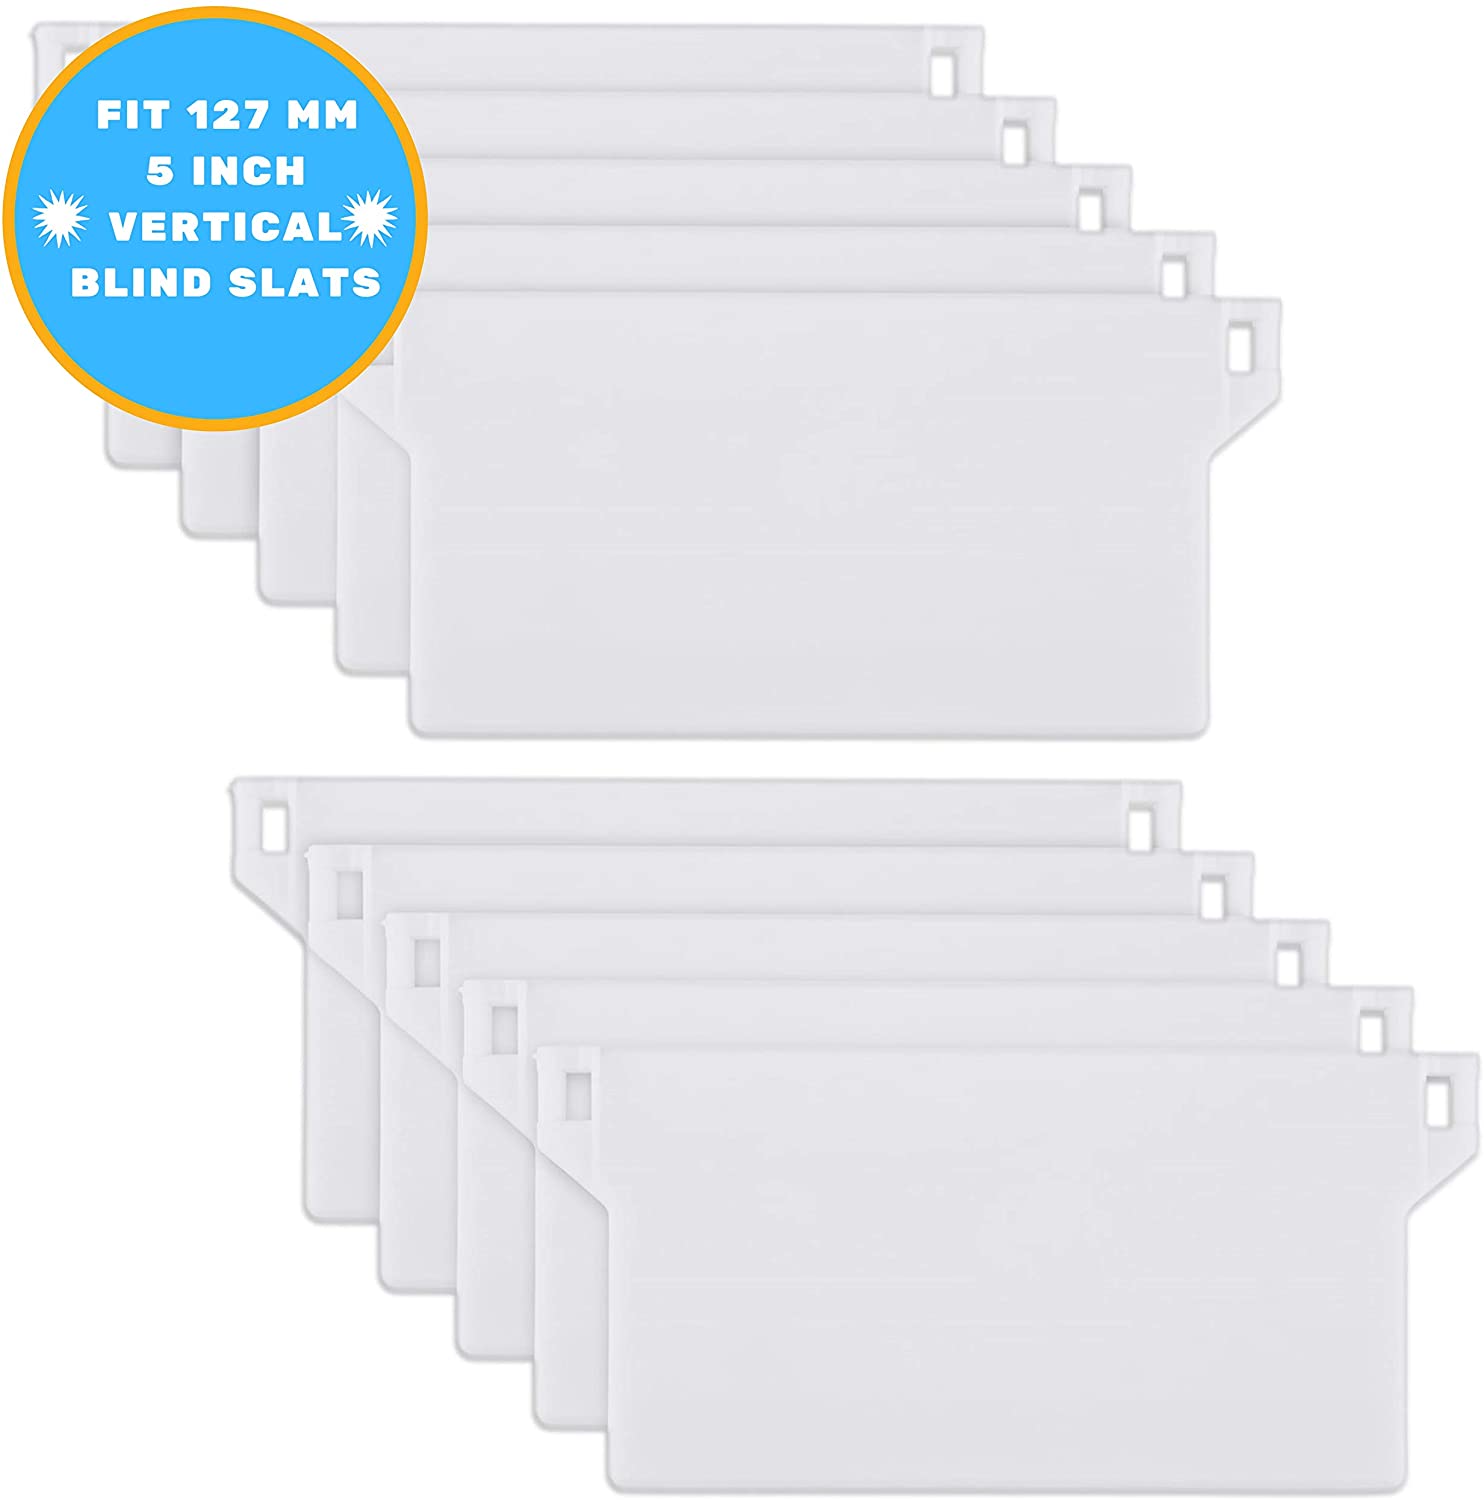 First Blinds Vertical Blind Spare Parts - 20 Bottom Weights, 127mm / 5 Inches 3